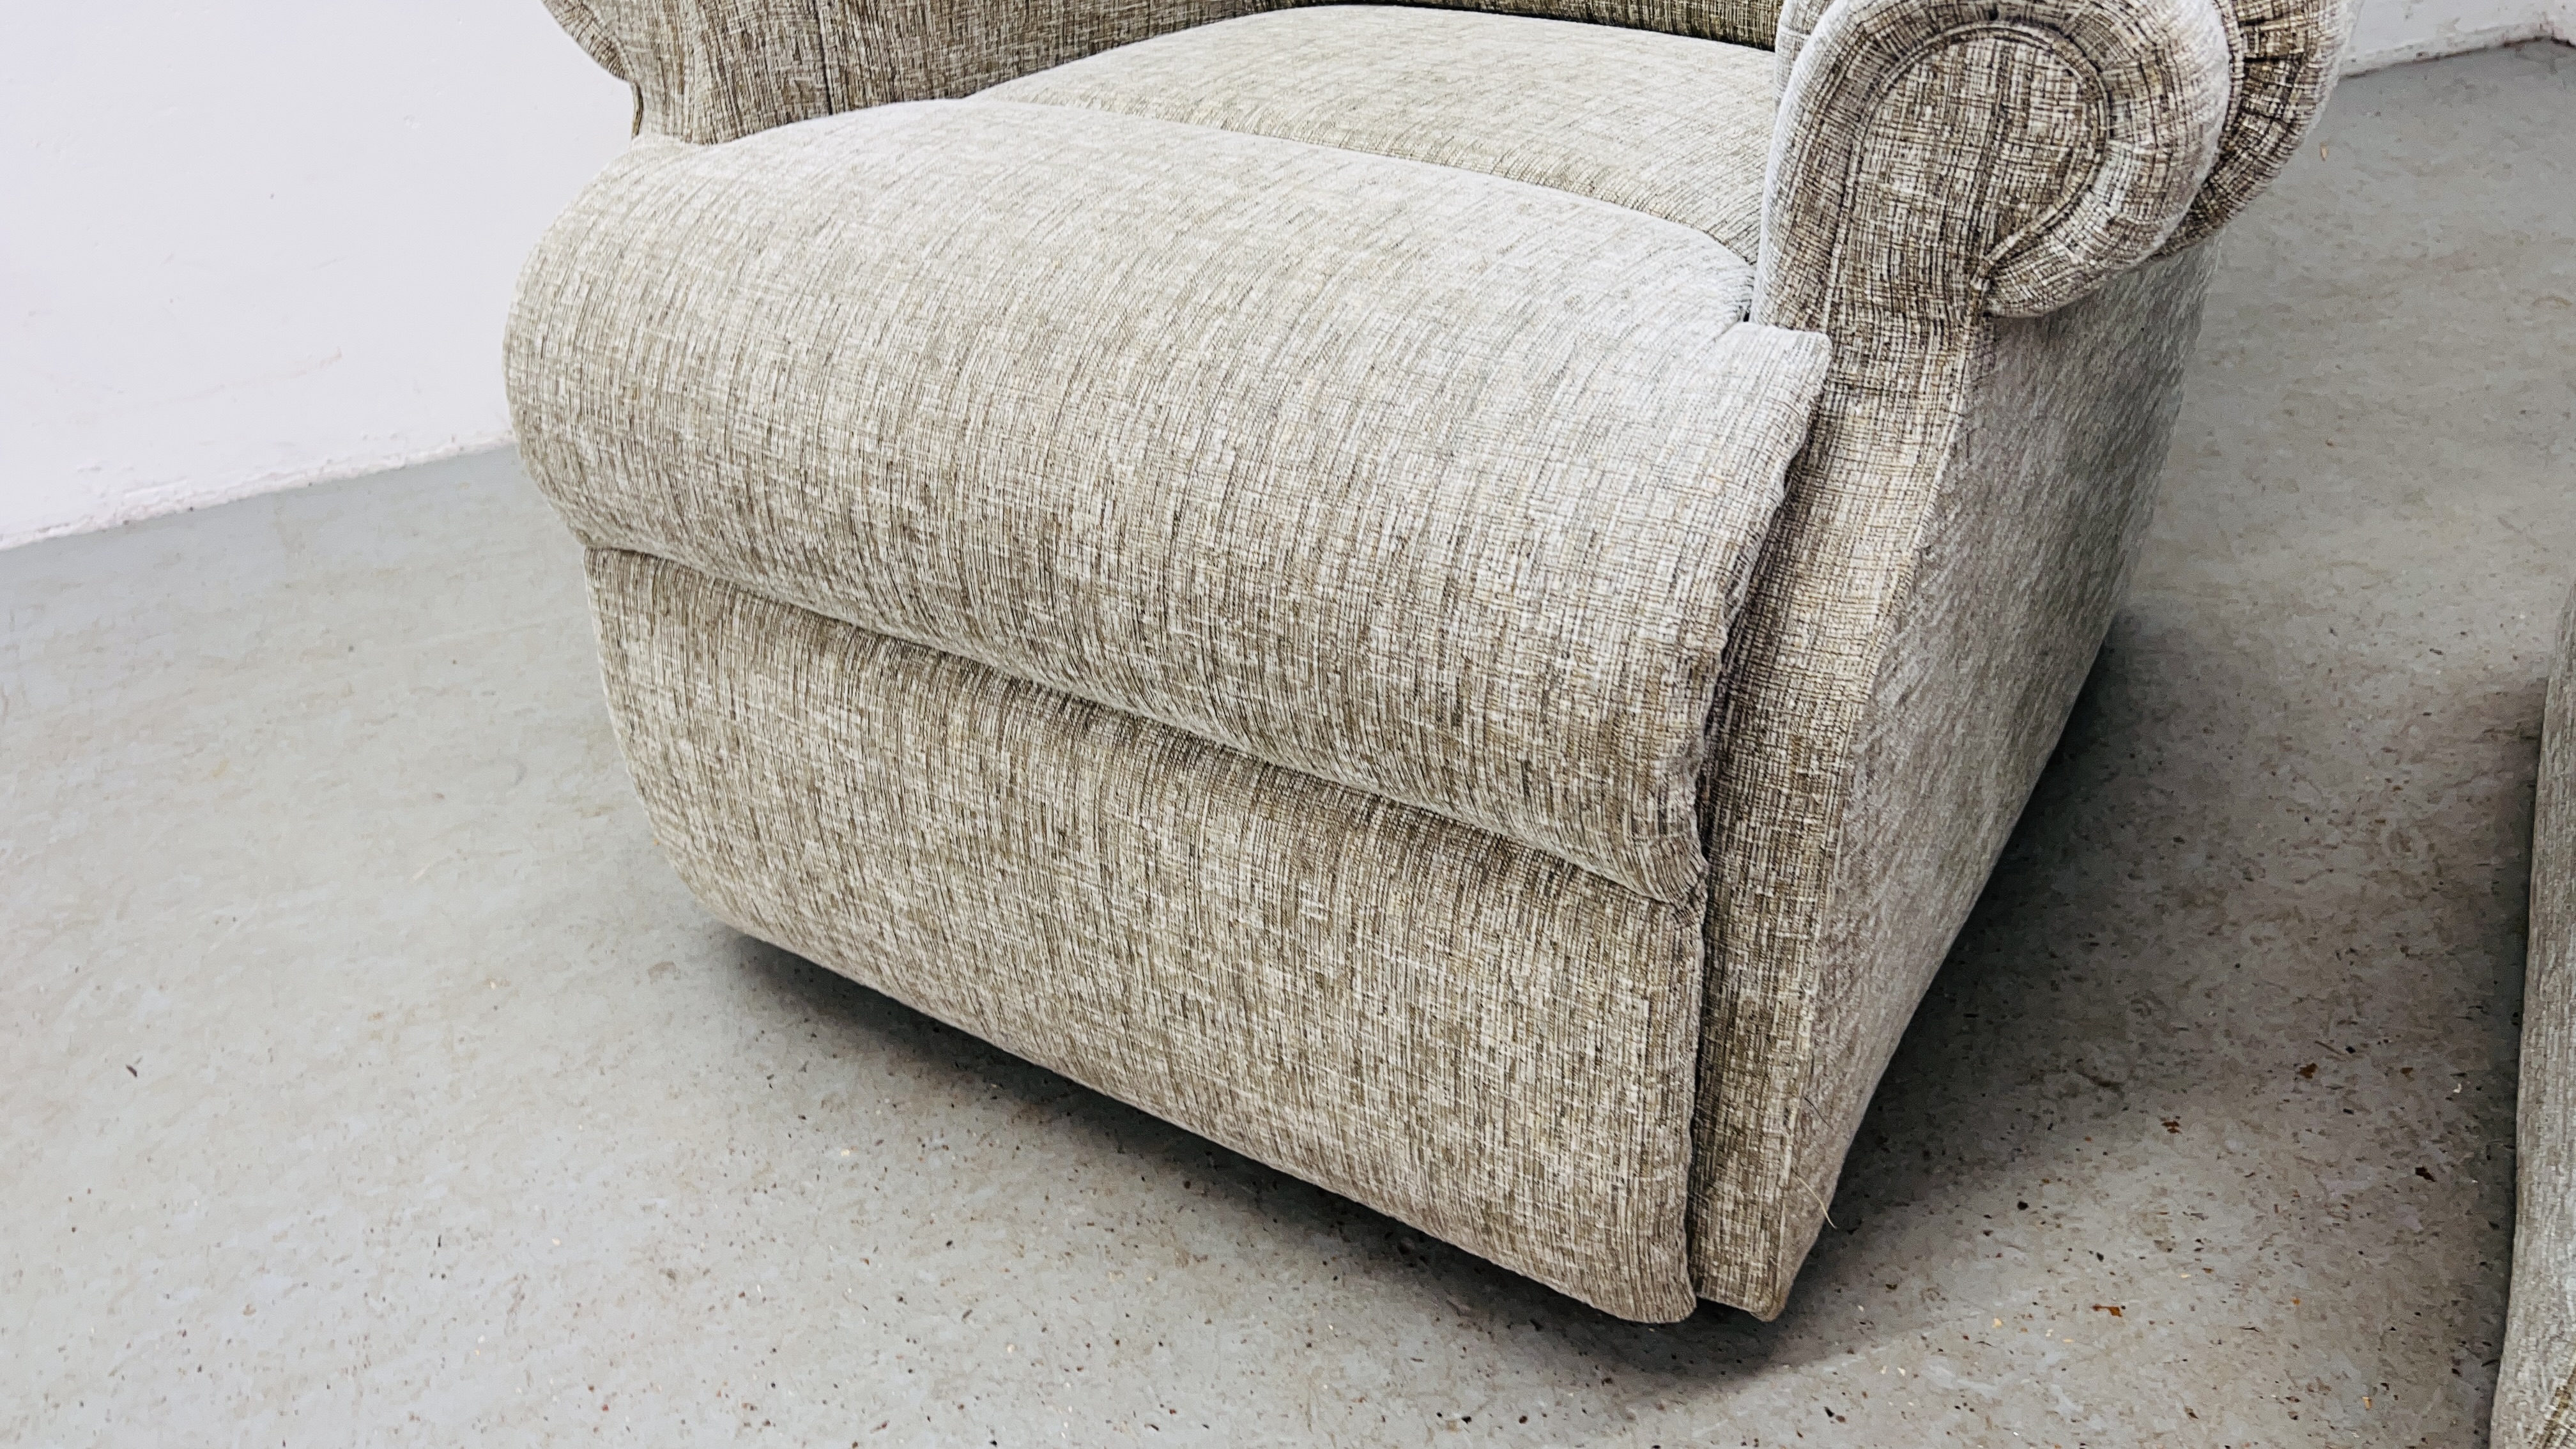 A GOOD QUALITY "SHERBORNE" TWO SEATER SOFA W 140CM X D 82CM X H 94CM ALONG WITH A MATCHING ARMCHAIR. - Image 11 of 14